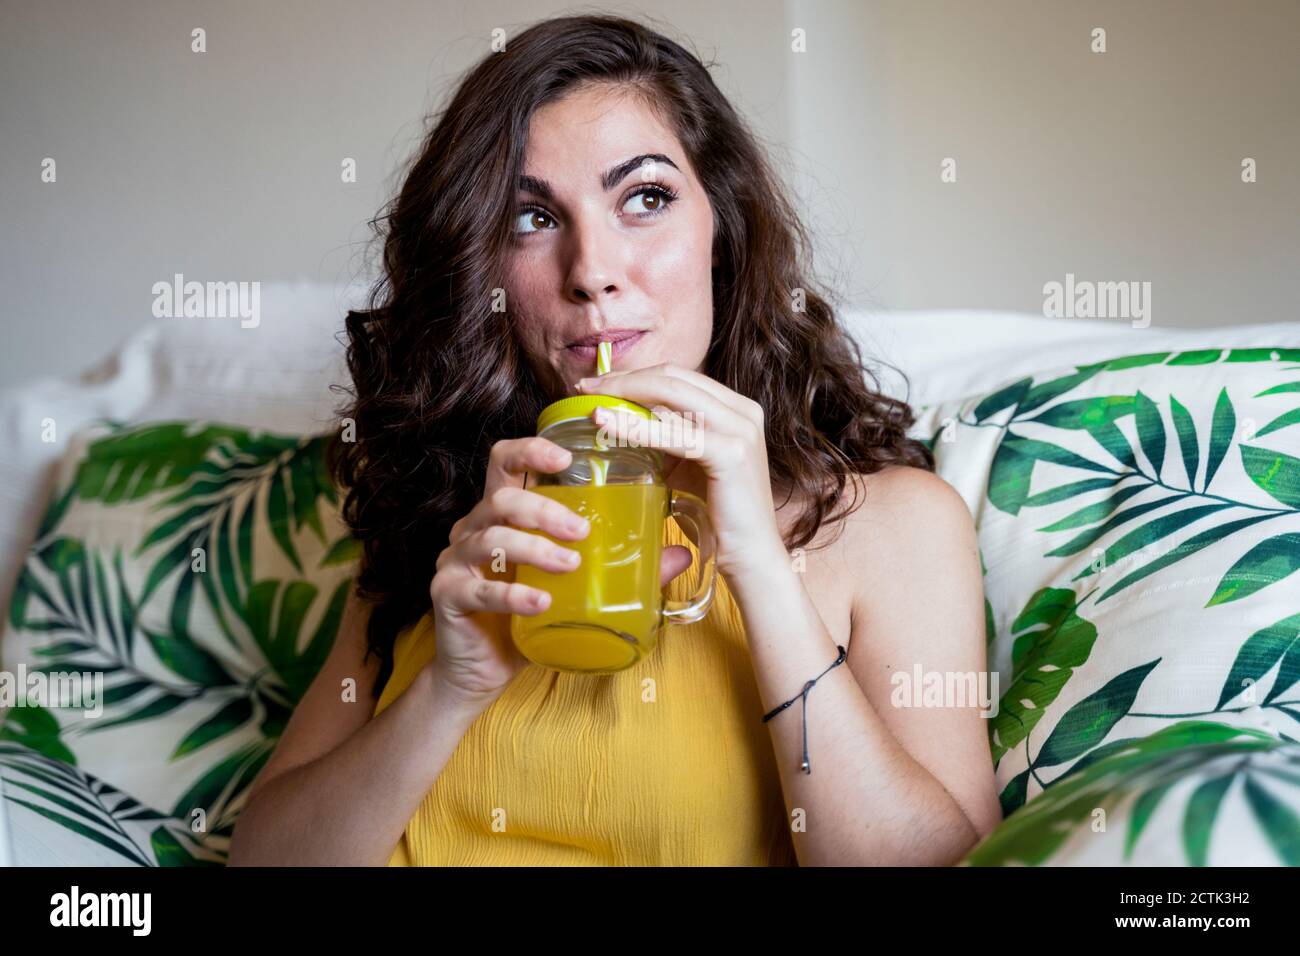 Beautiful young woman with long brown hair sipping juice from straw in mason jar while looking away Stock Photo